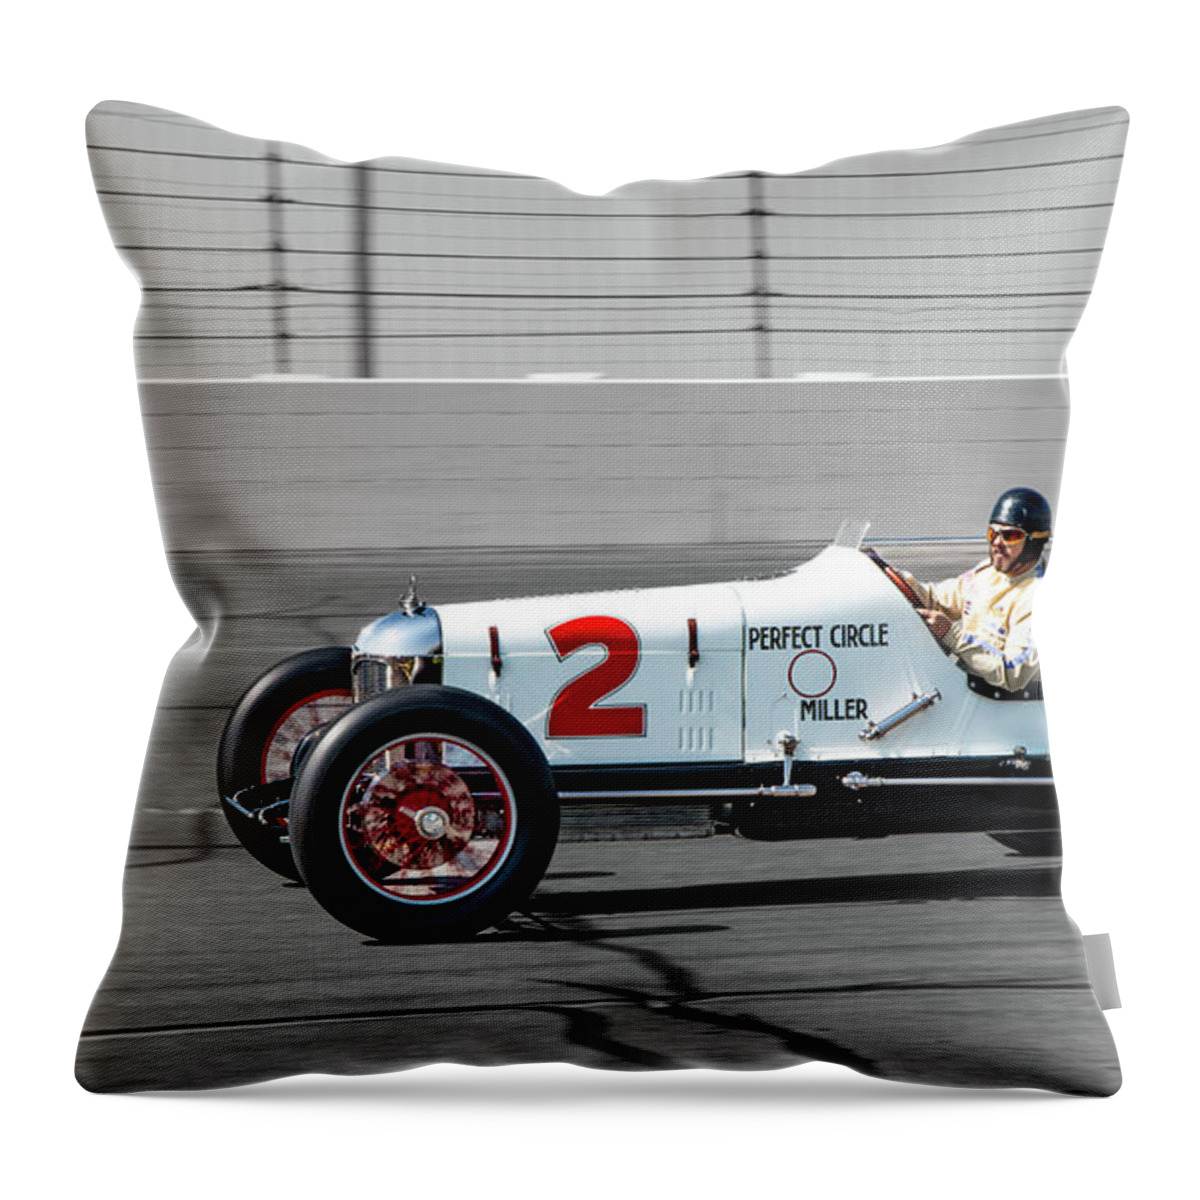 Svra Throw Pillow featuring the photograph 1926 Miller  by Josh Williams